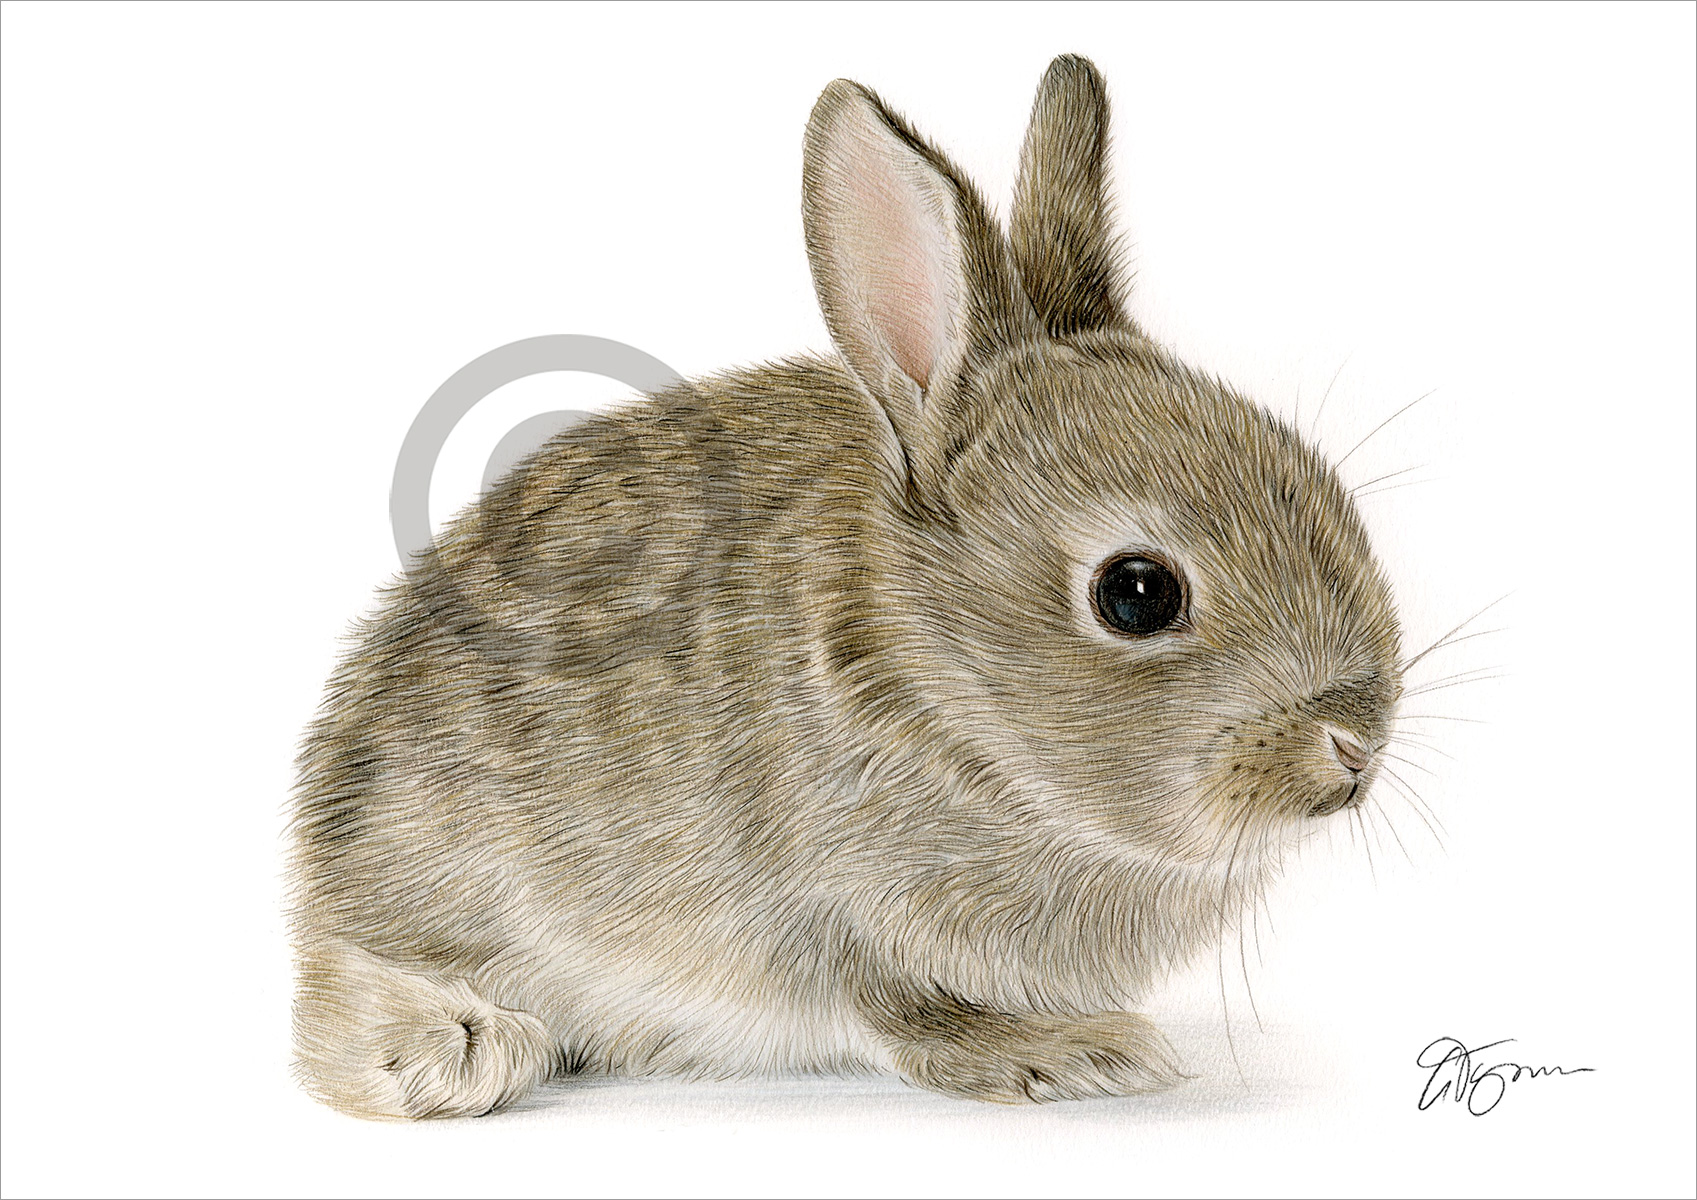 Colour pencil drawing of a rabbit by artist Gary Tymon